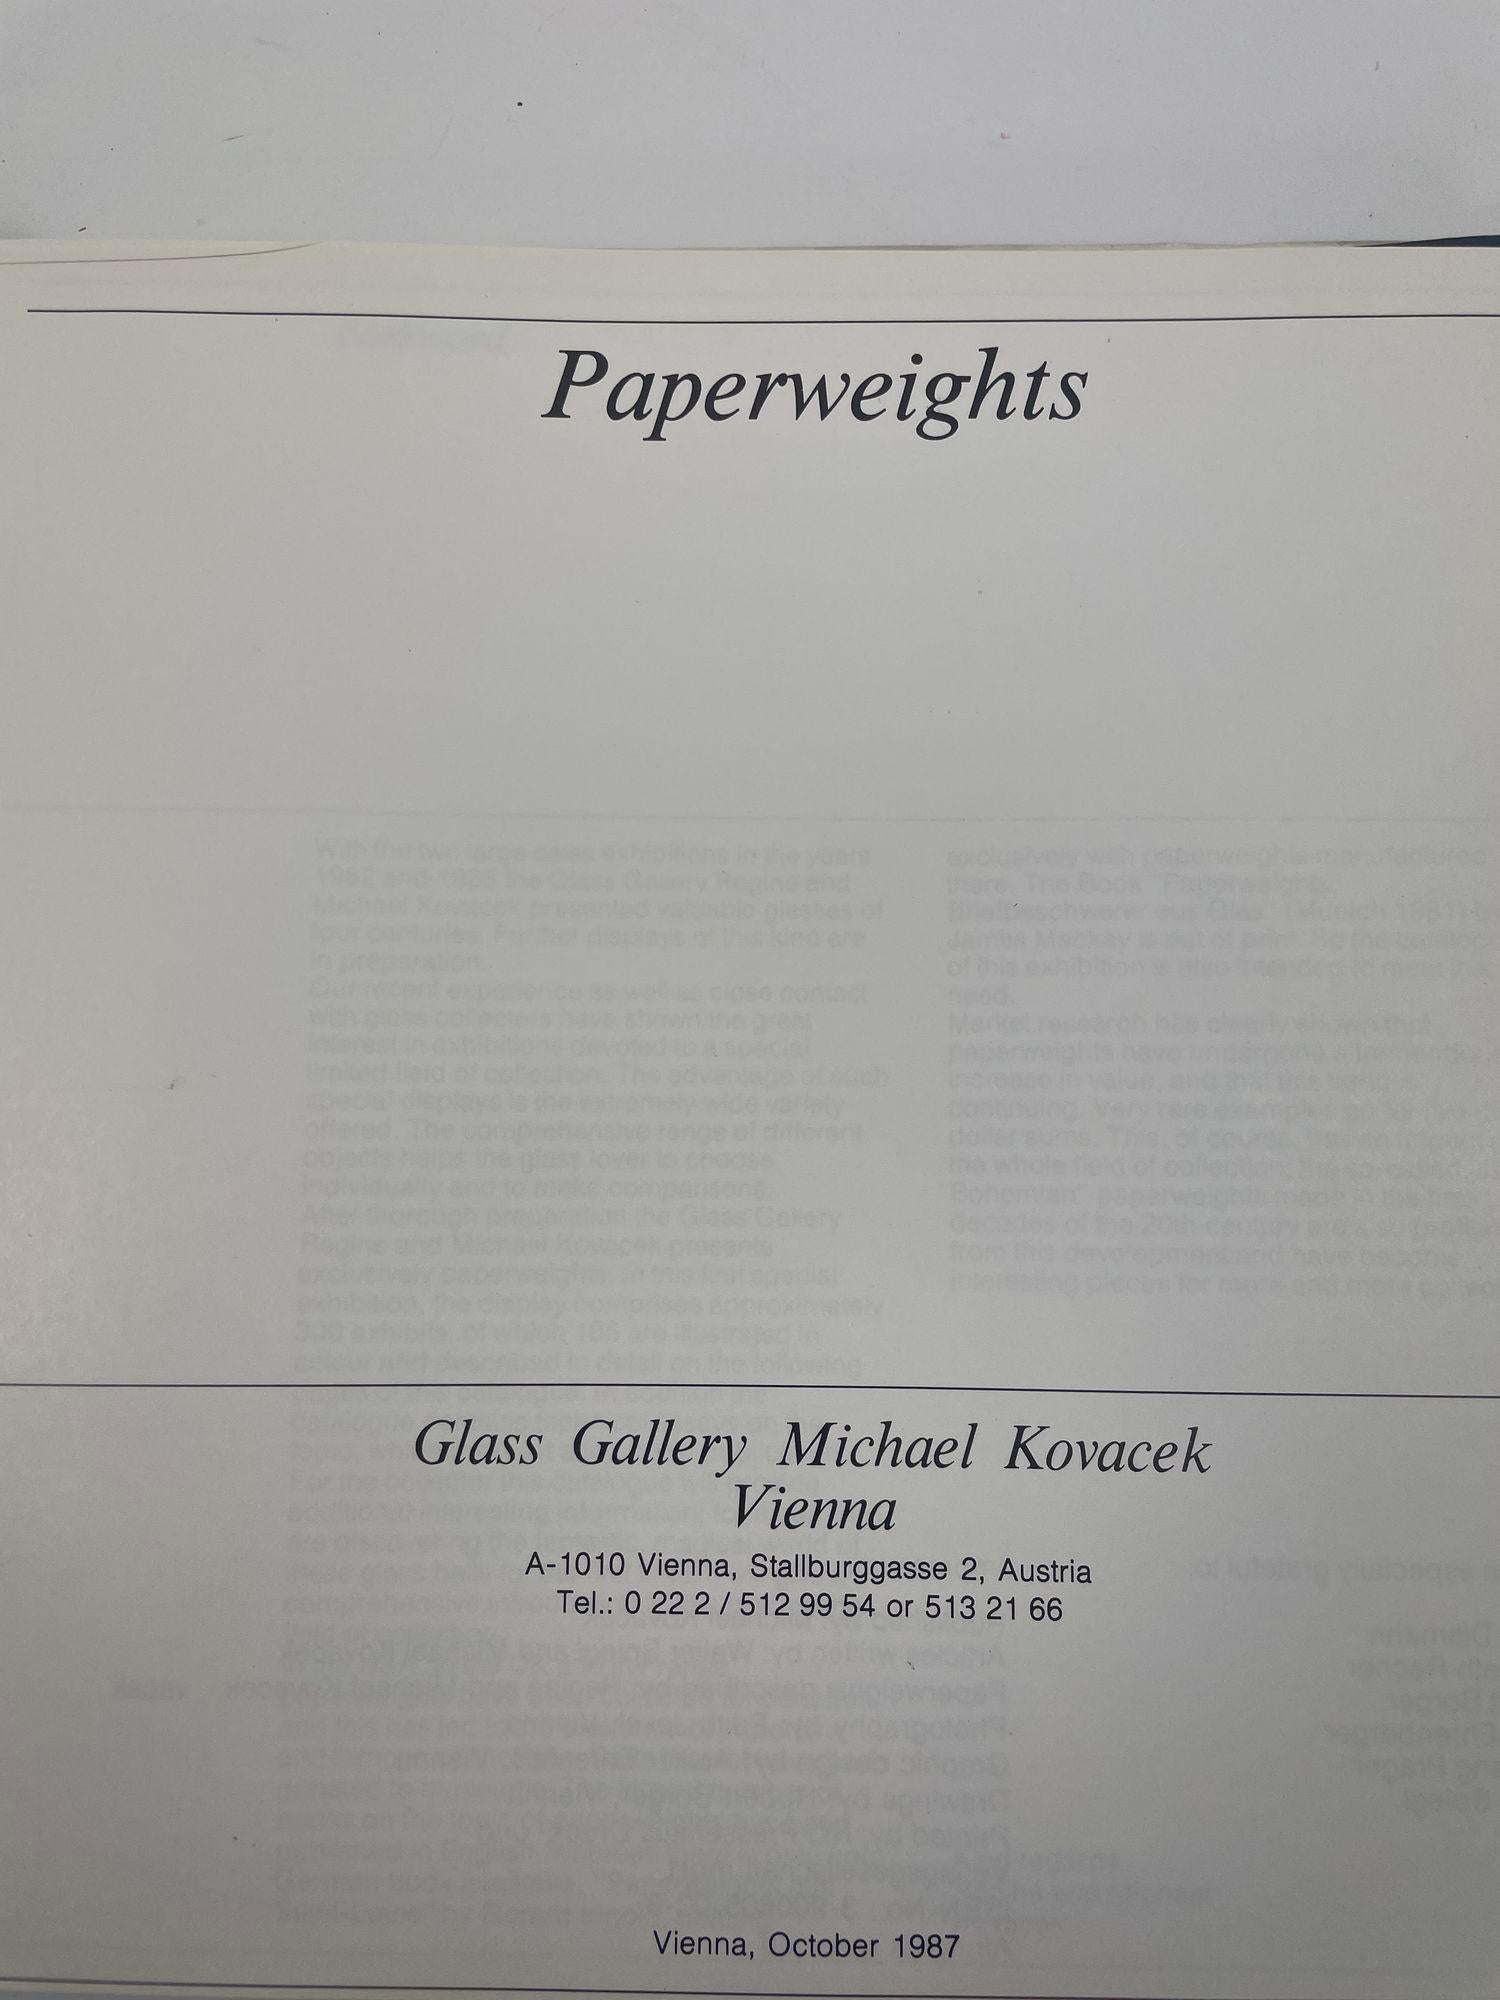 20th Century Paperweights Glass Gallery Michael Kovacek Vienna 1987 Hardcover Reference Book For Sale